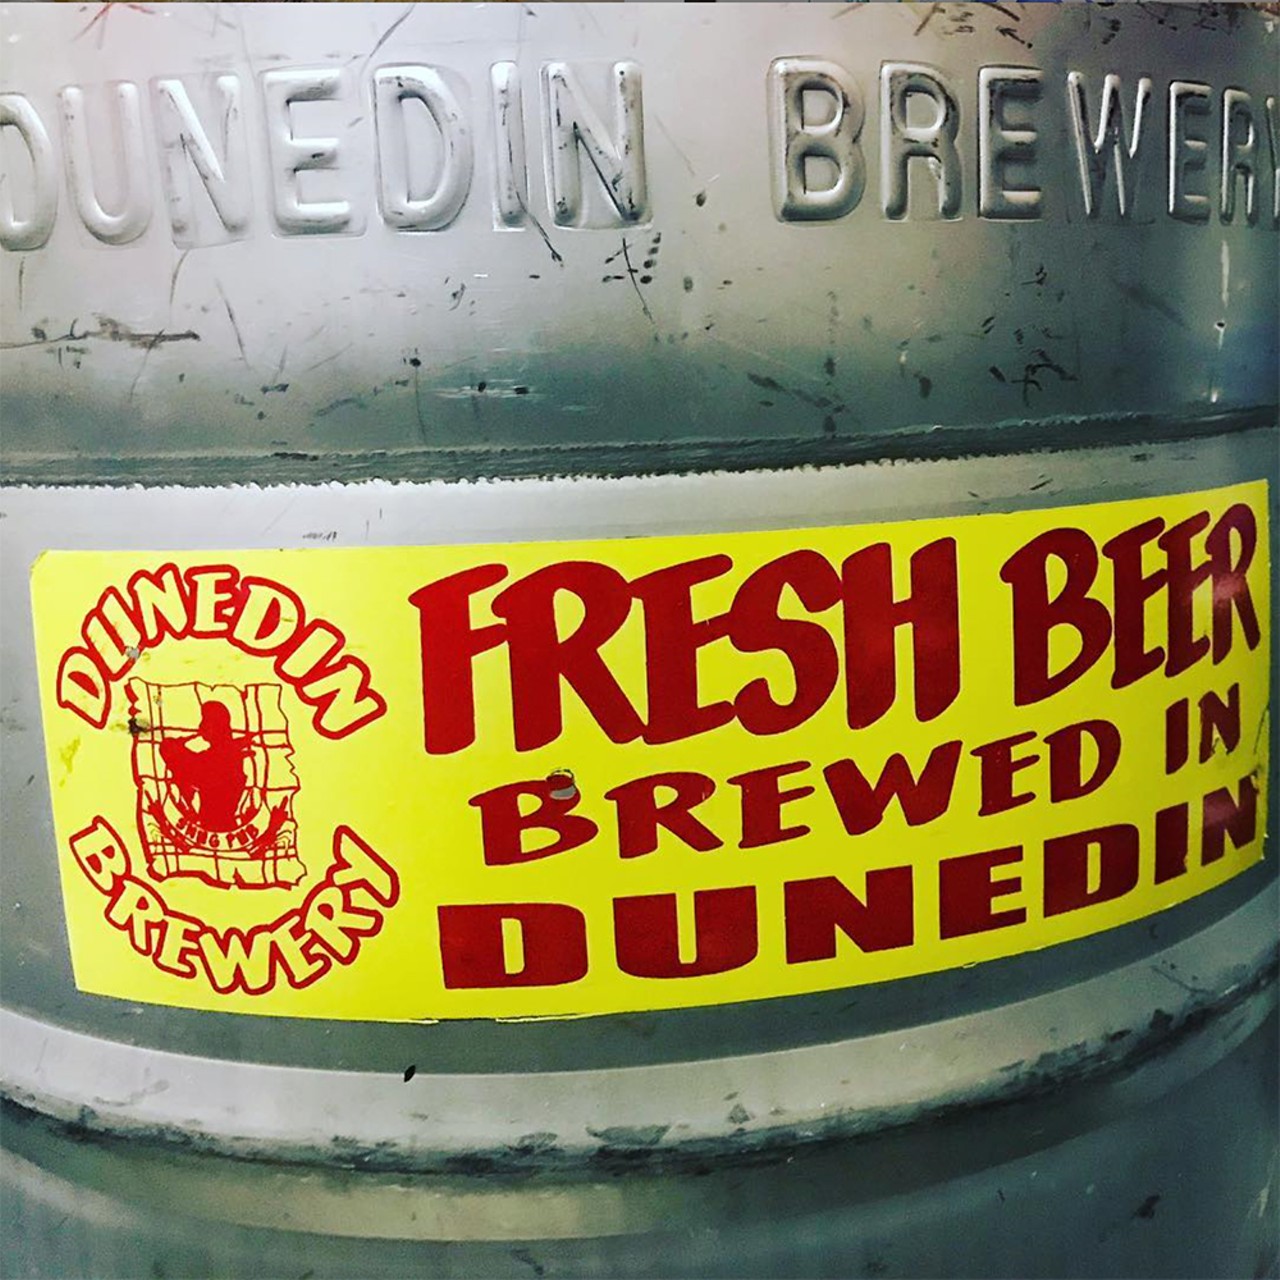 Celebrate the coming of Spring with beer and music at Dunedin BreweryThe 7th Annual Spring Beer Jam is here.Thurs.-Sun., Mar. 28-31
Photo via Instagram @dunedinbrewery